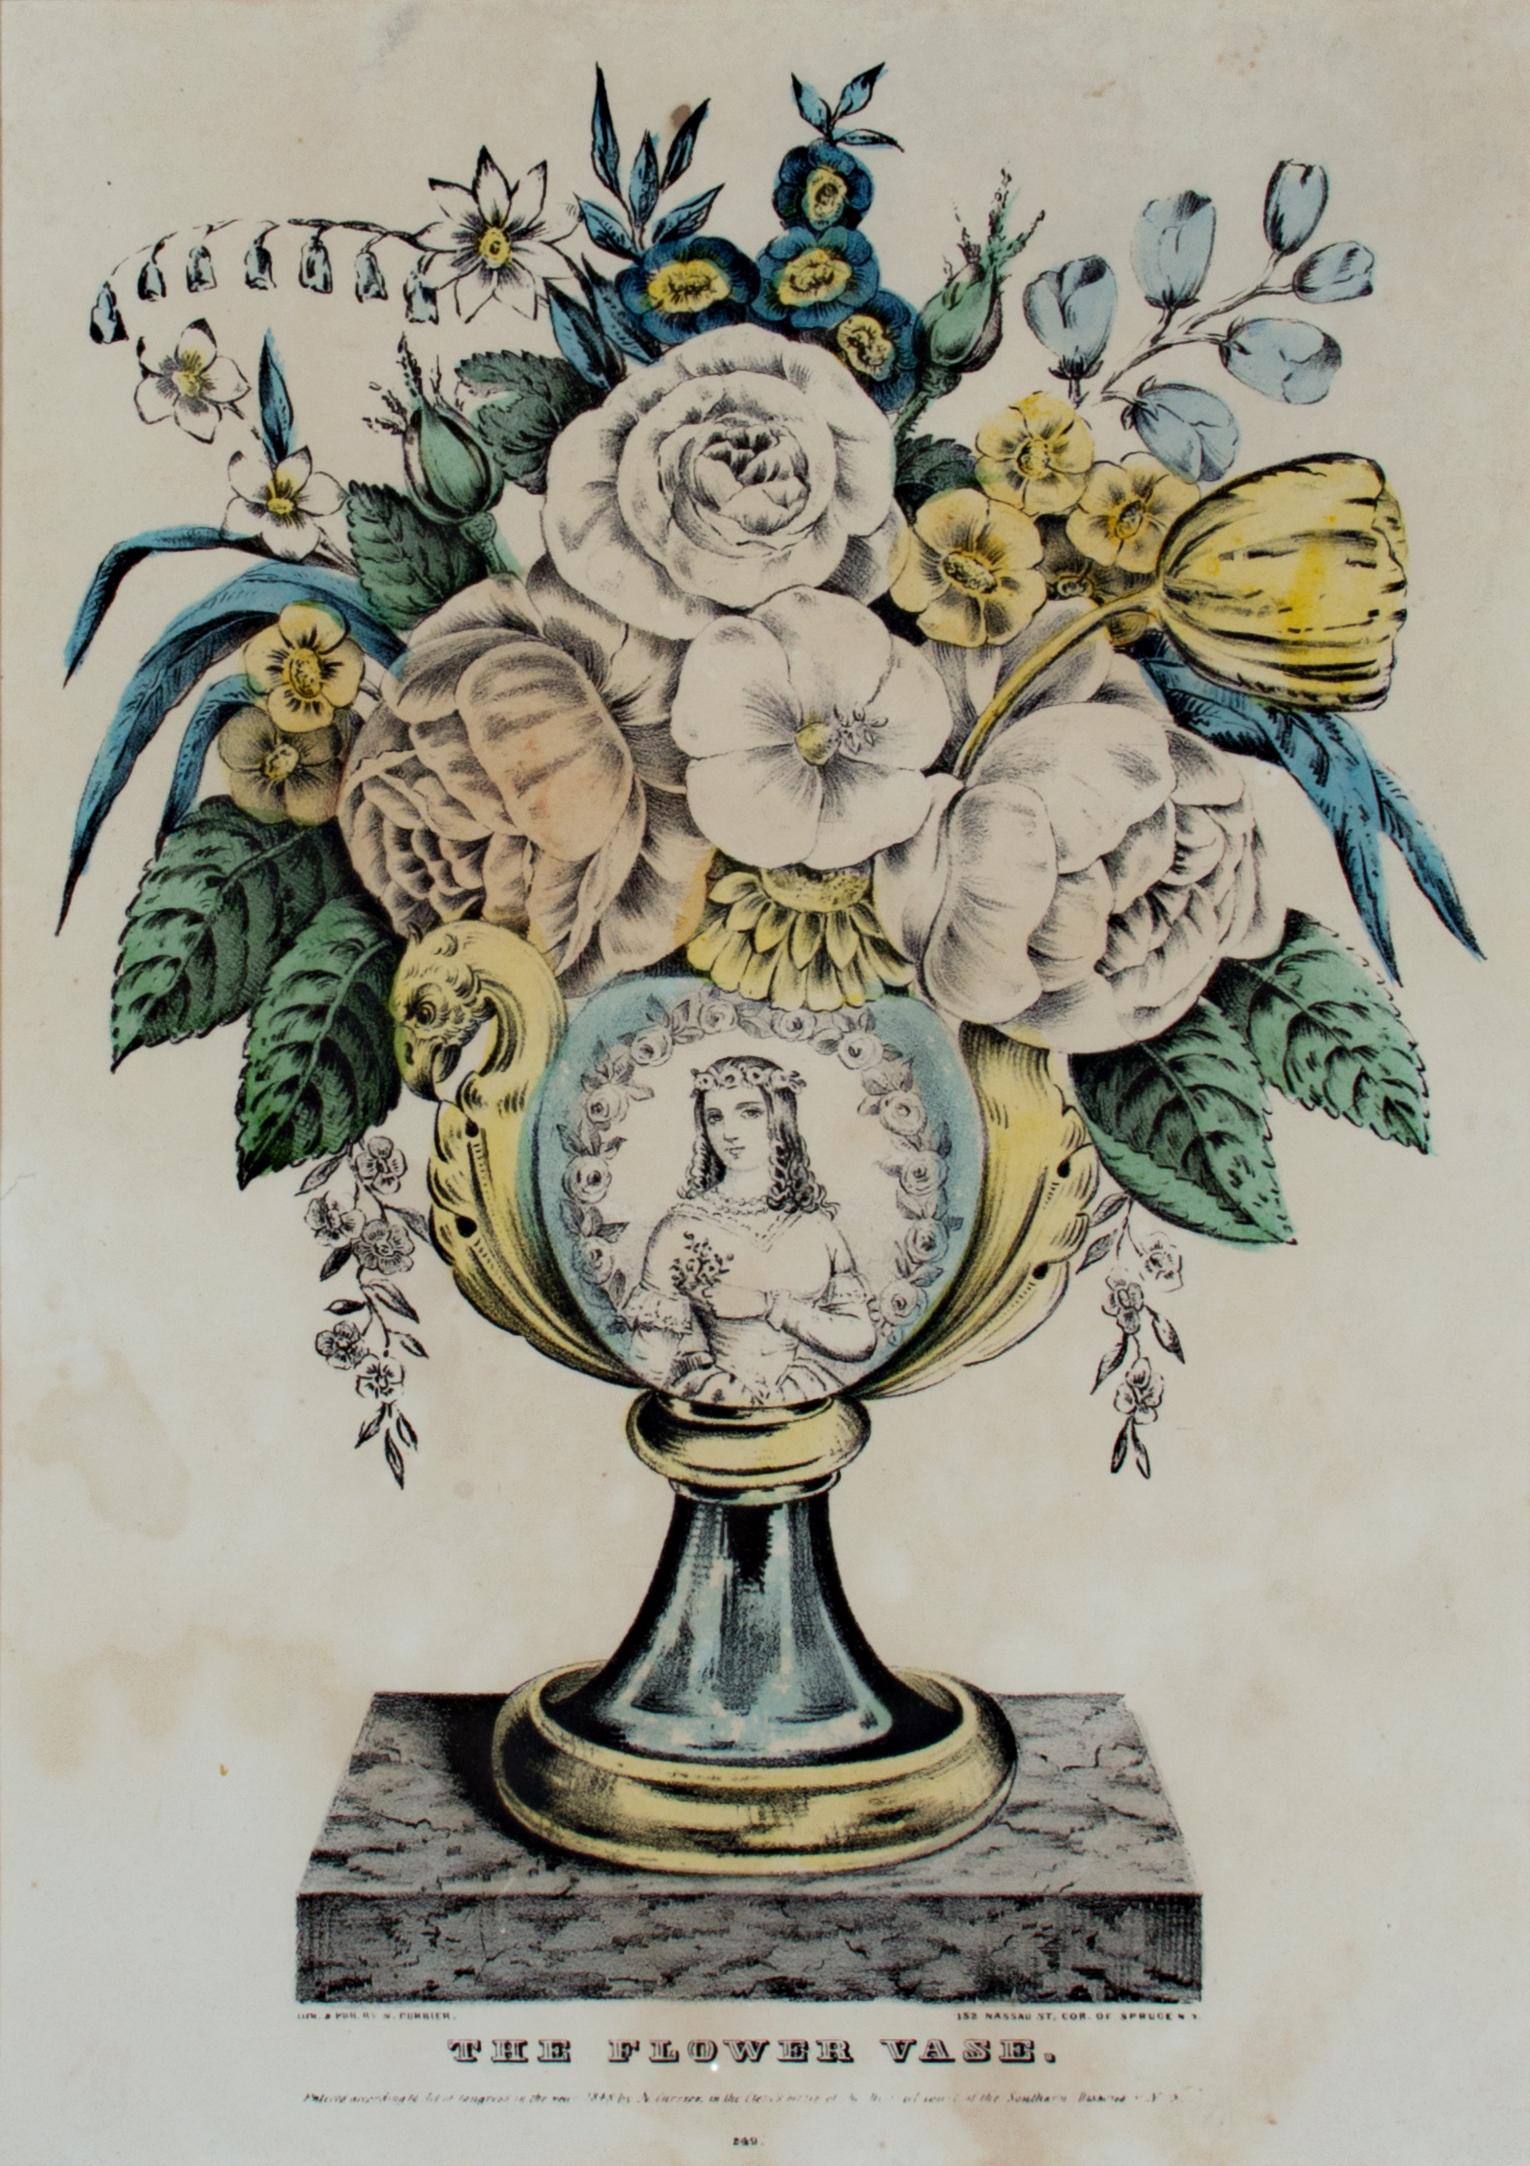 19th century color lithograph still life vase flowers  - Print by Nathaniel Currier